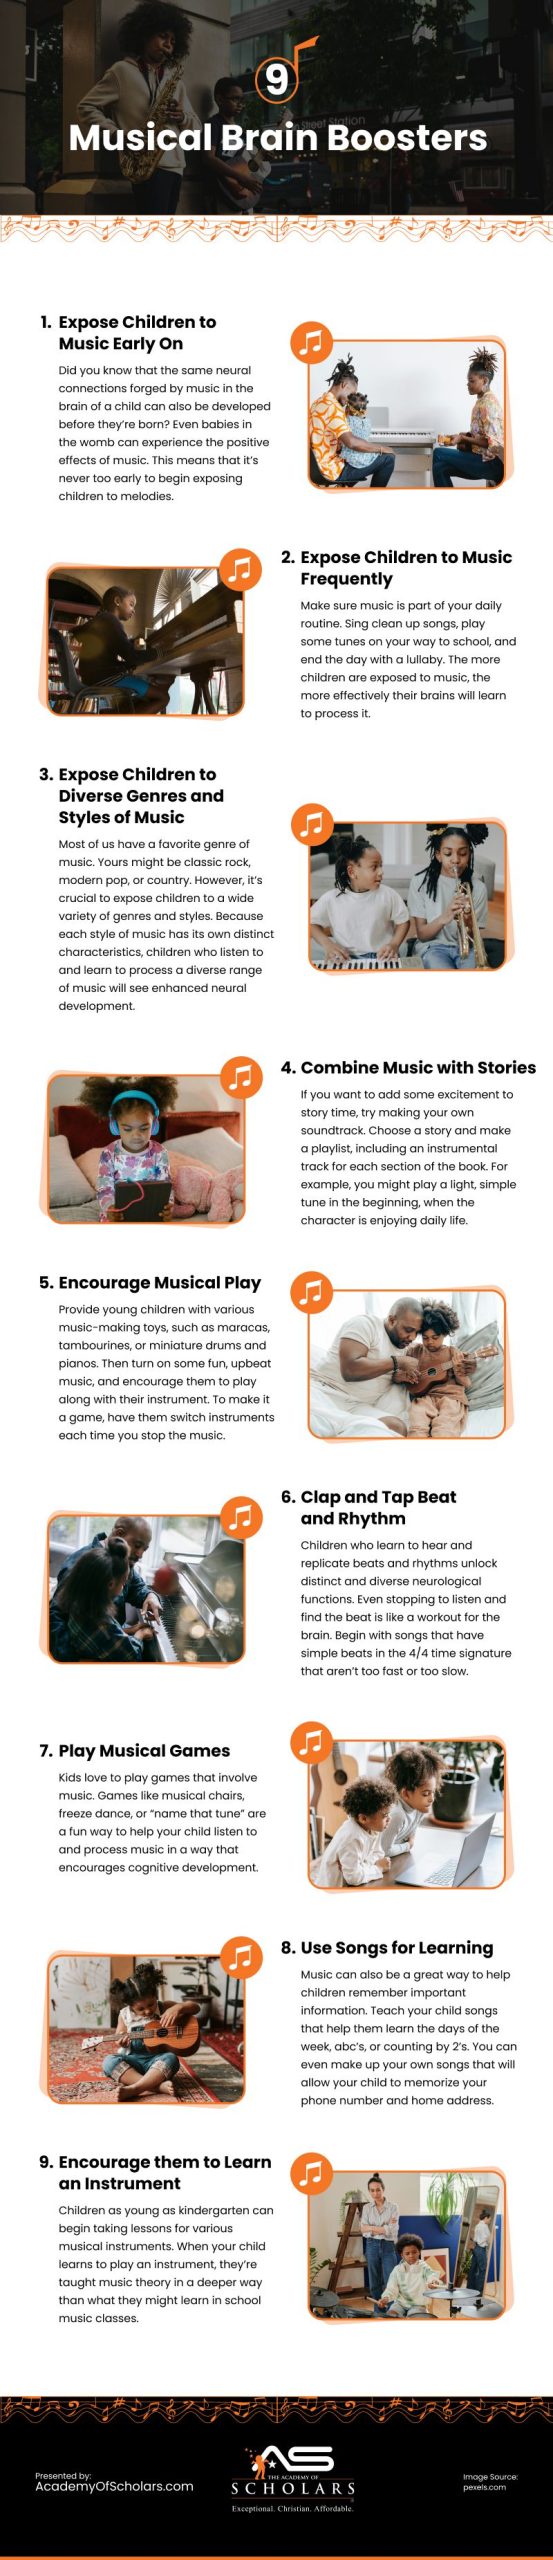 9 Musical Brain Boosters Infographic